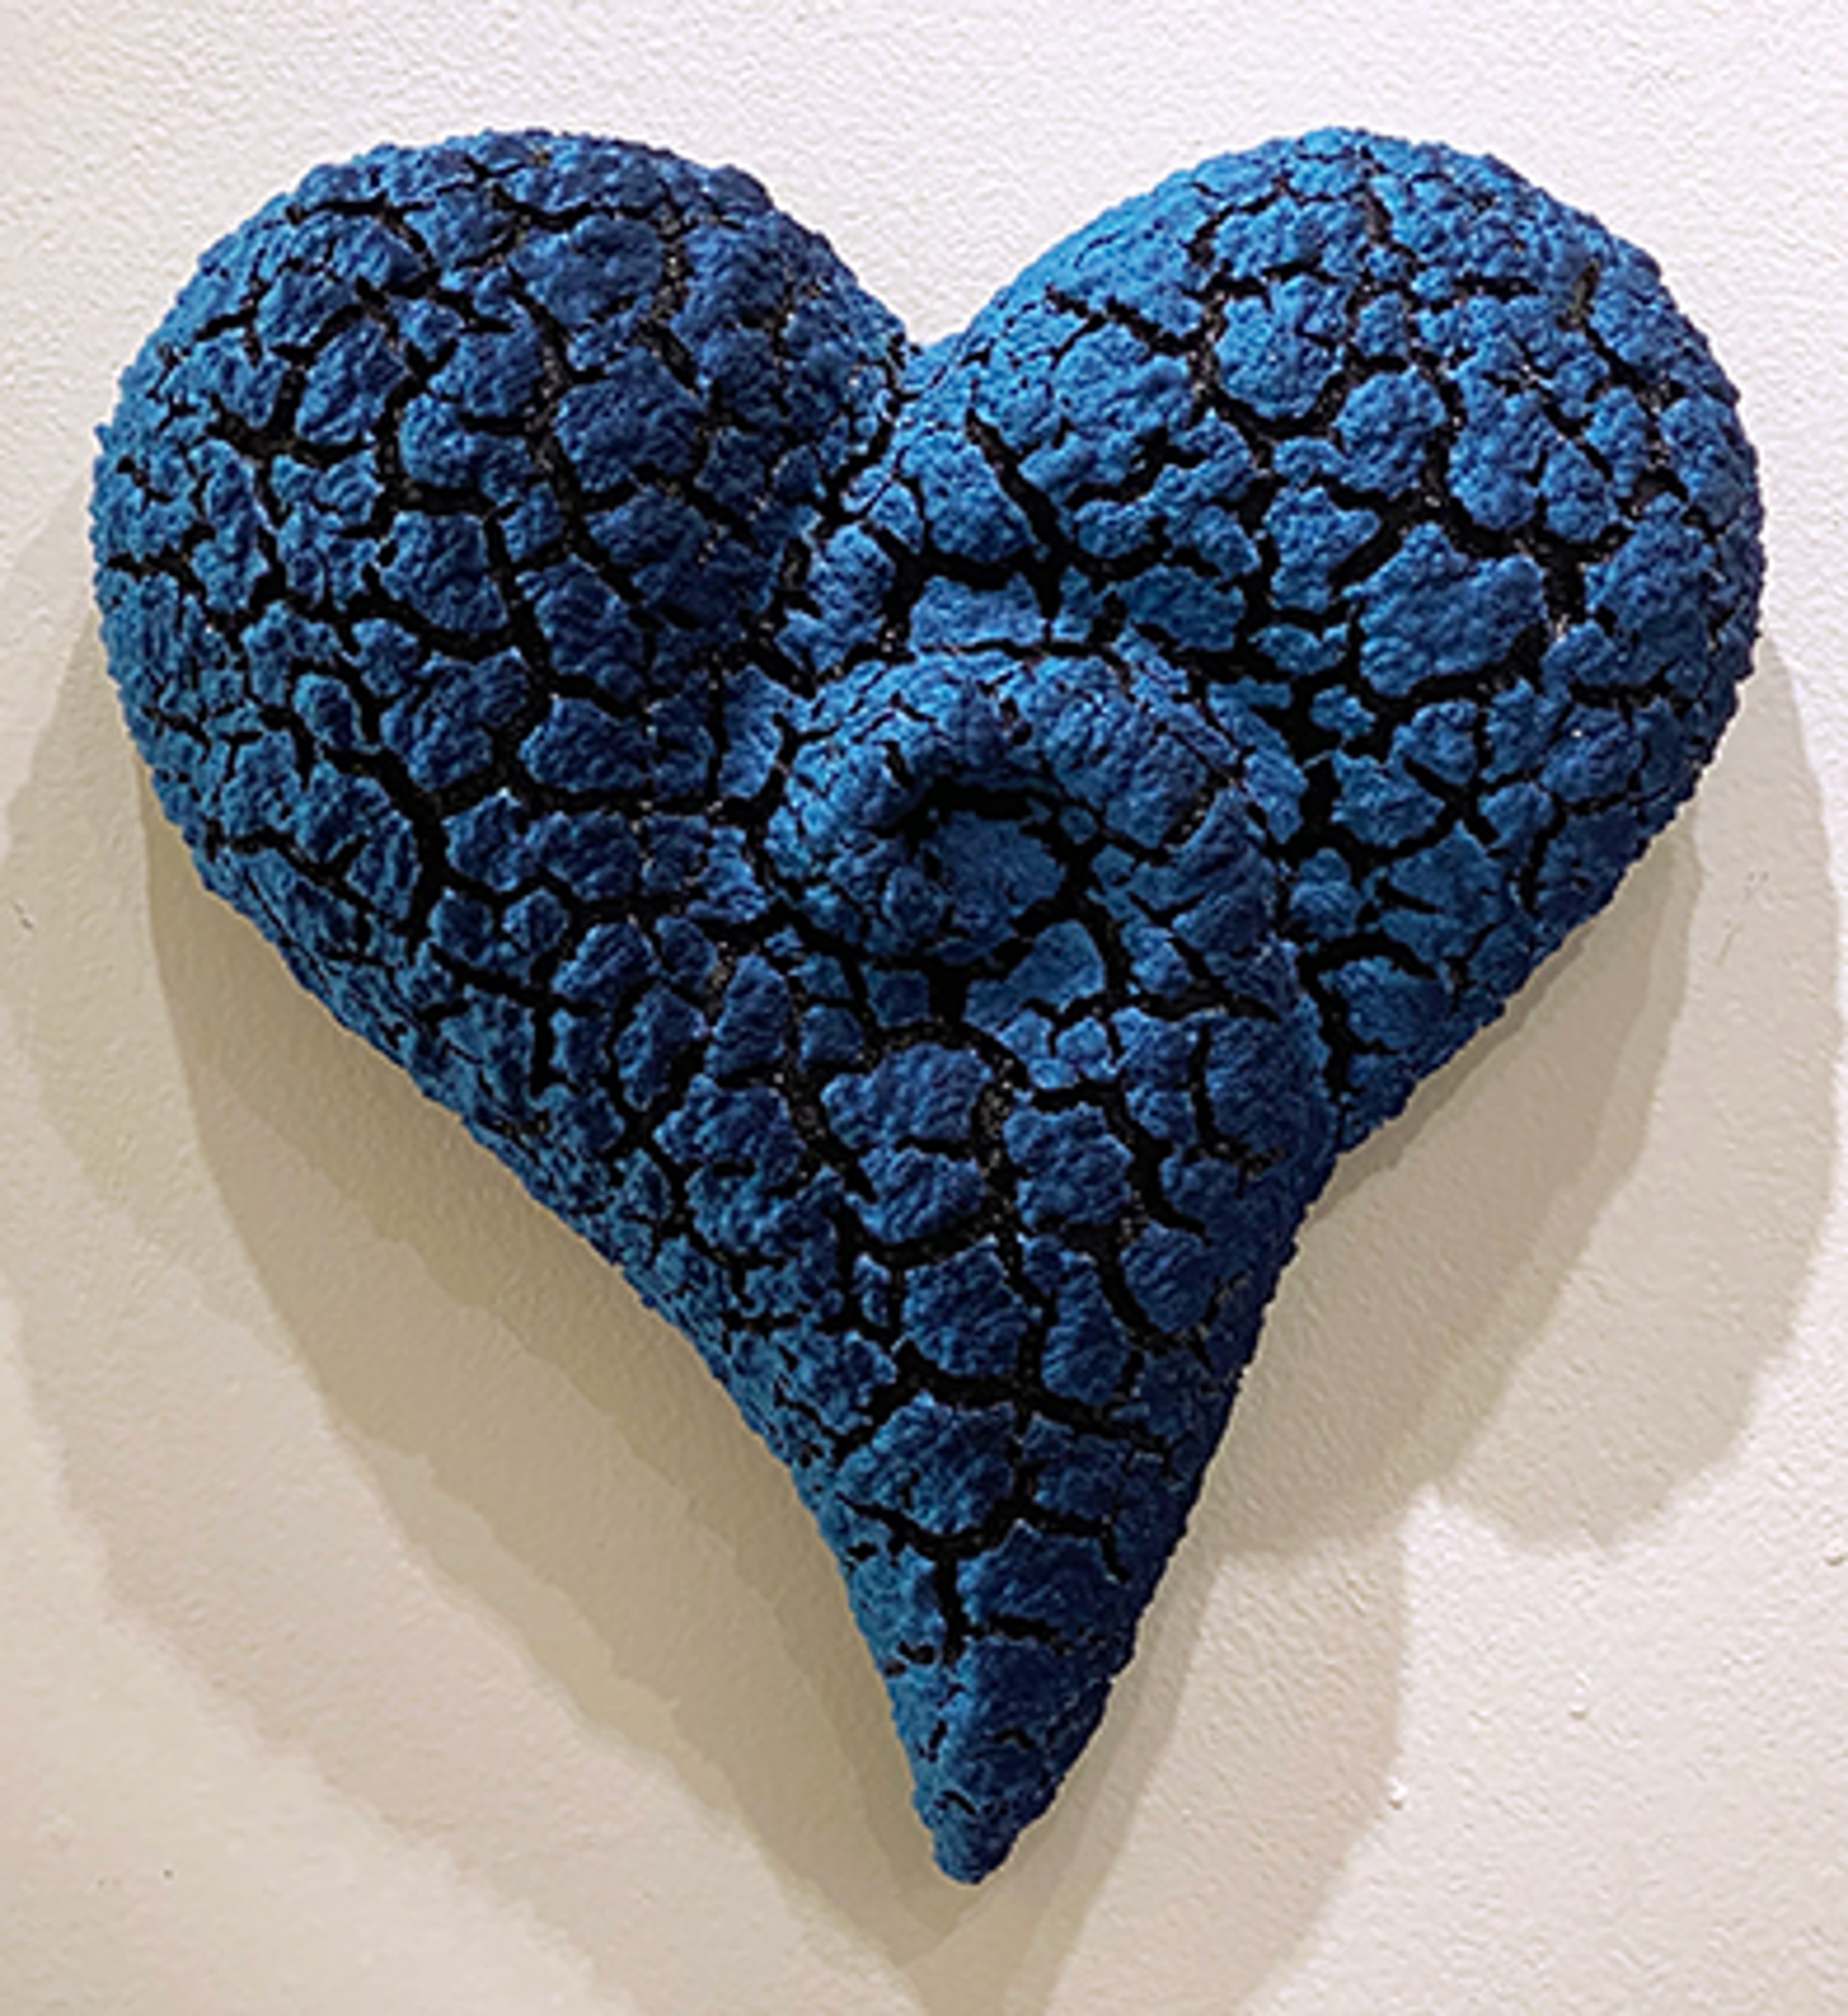 Commission Turquoise Blue/Sapphire Swirled Lichen Heart by Randy O'Brien